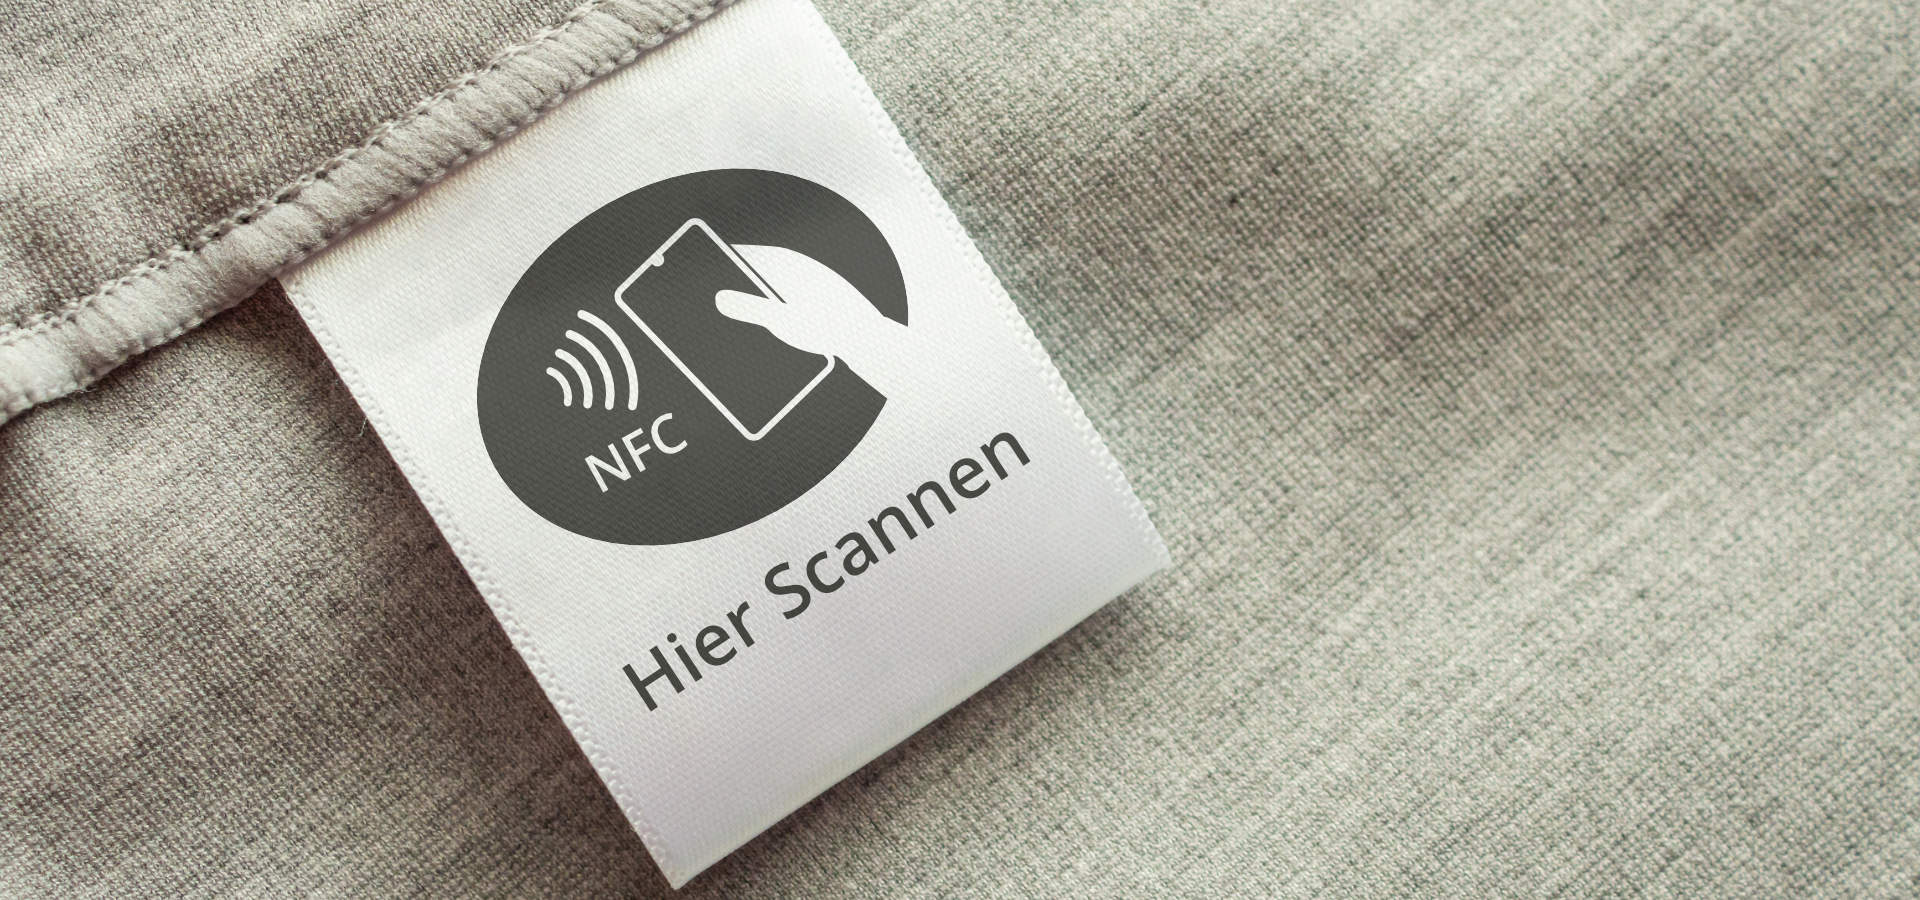 NFC tag on a piece of cloth